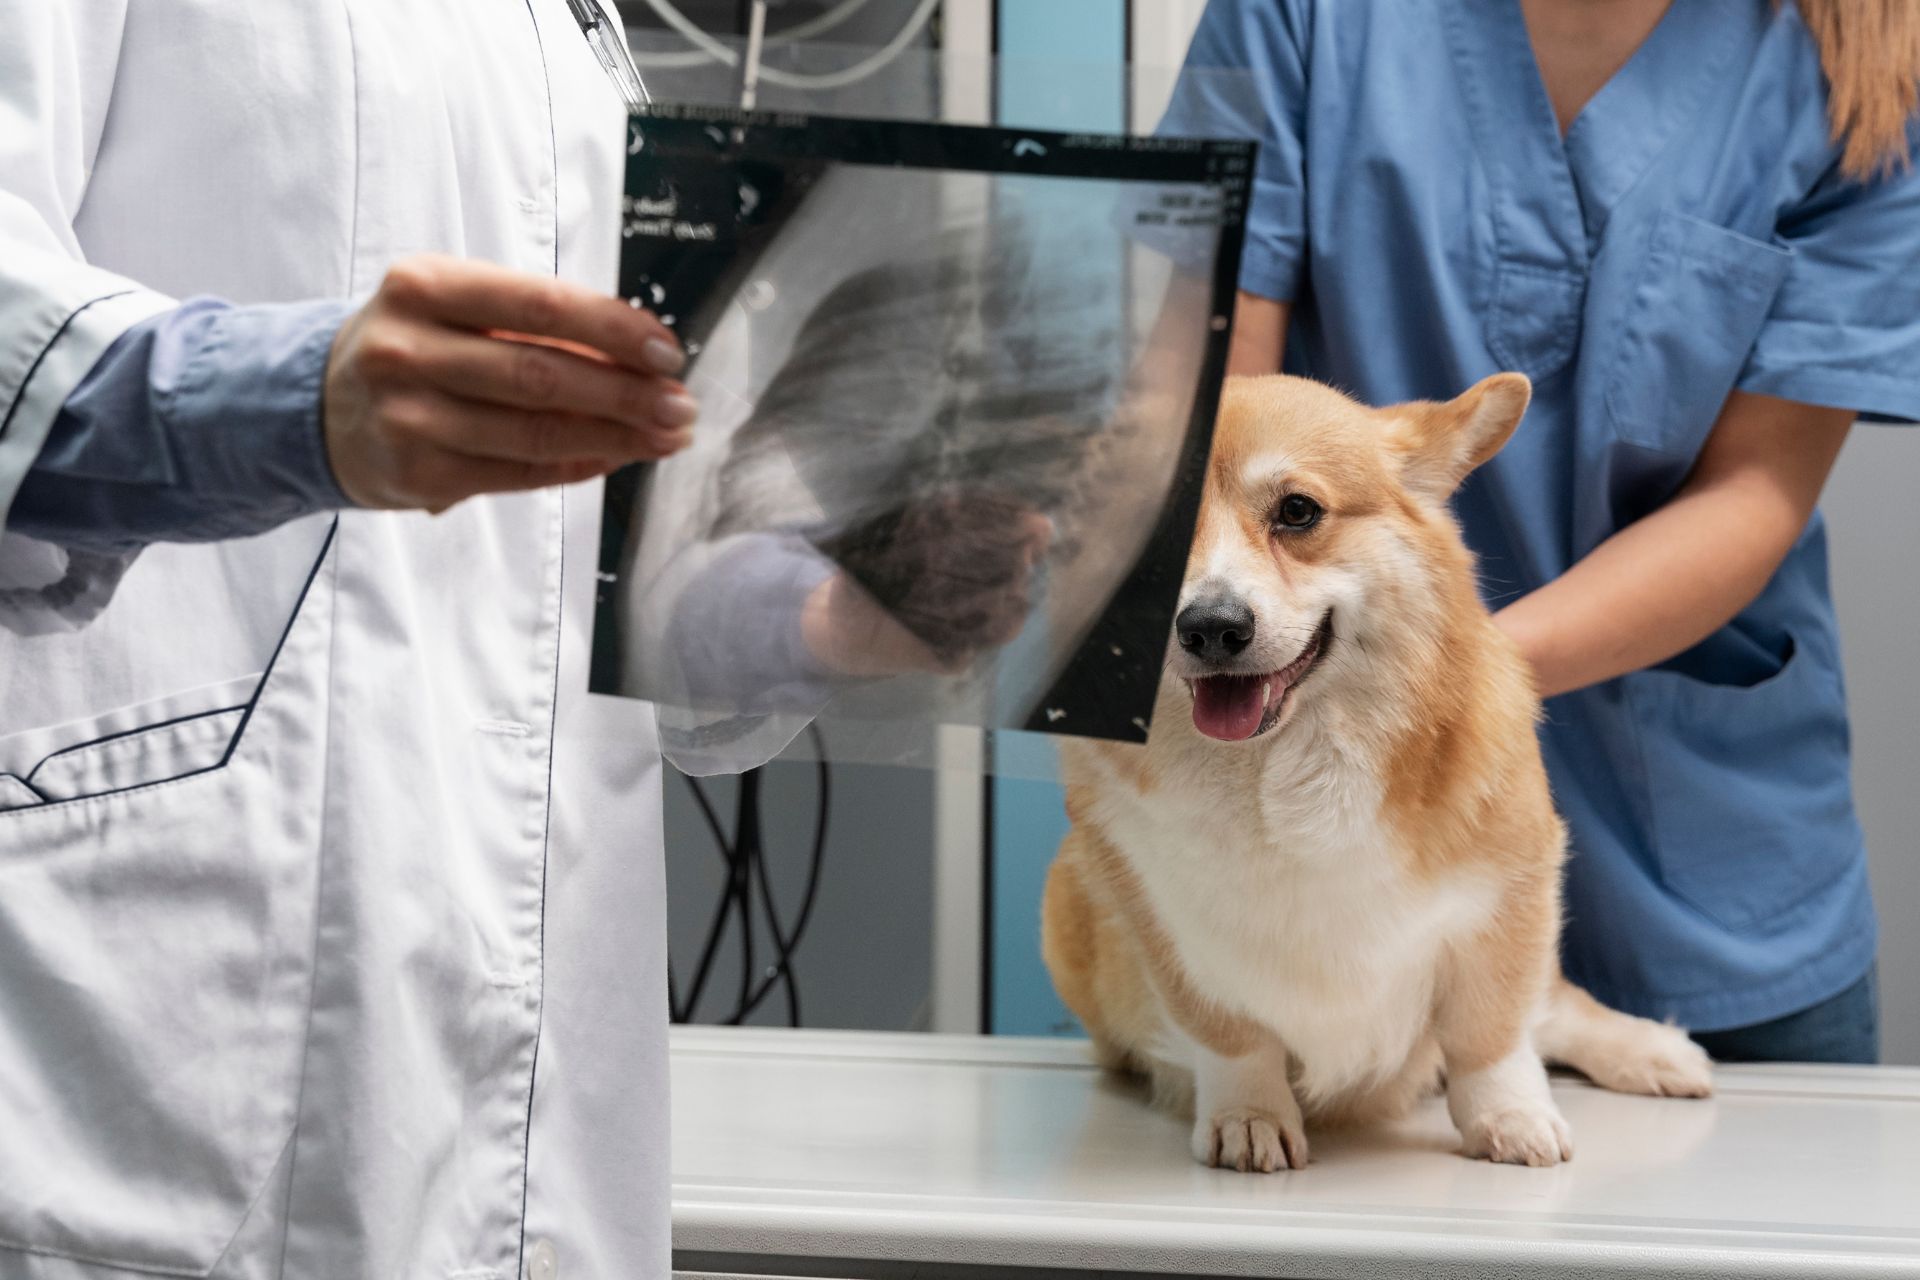 the dog looking at the x-ray